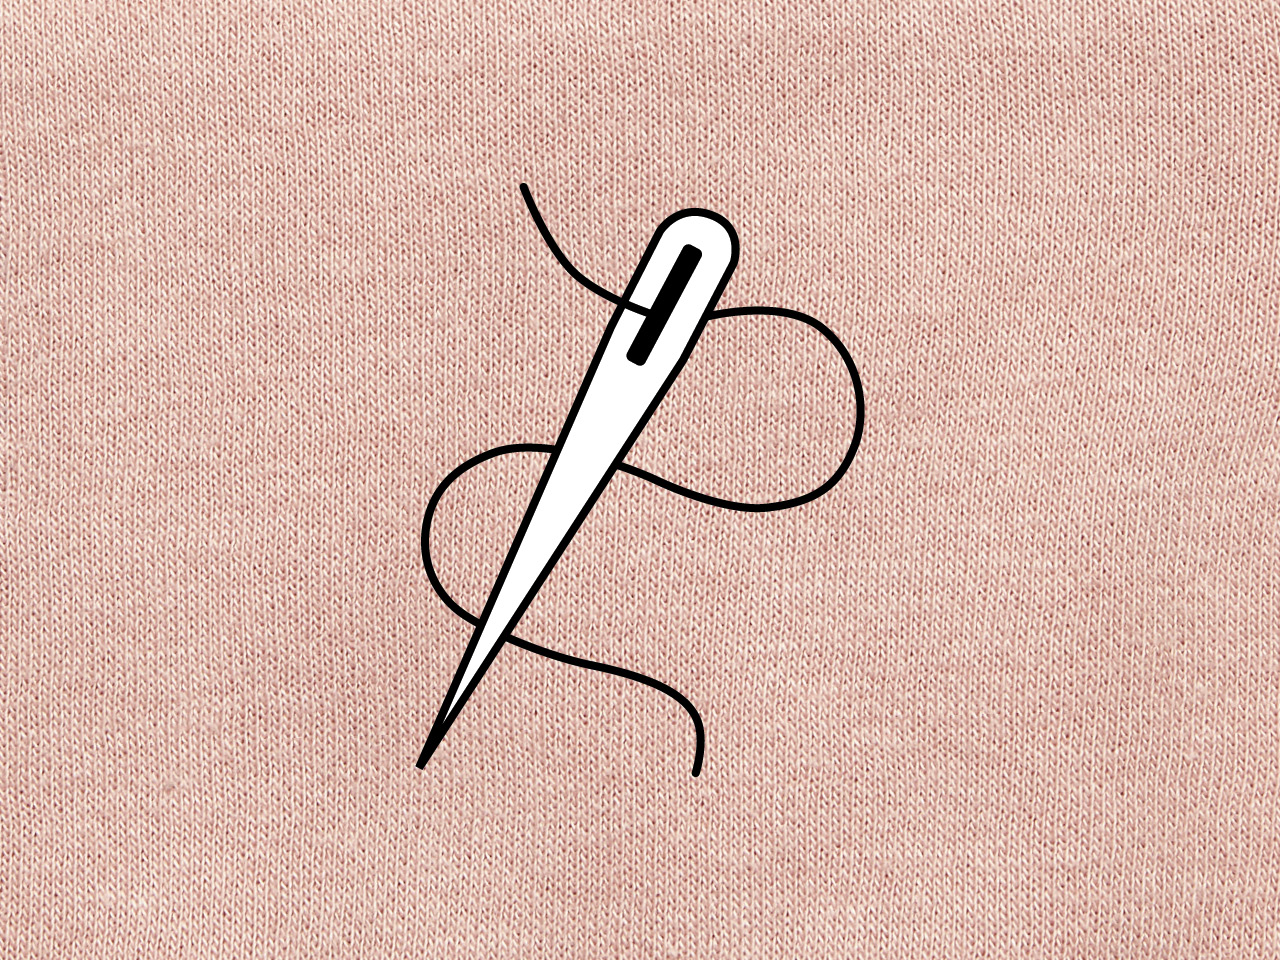 An illustration of a needle and thread on a pink cloth background